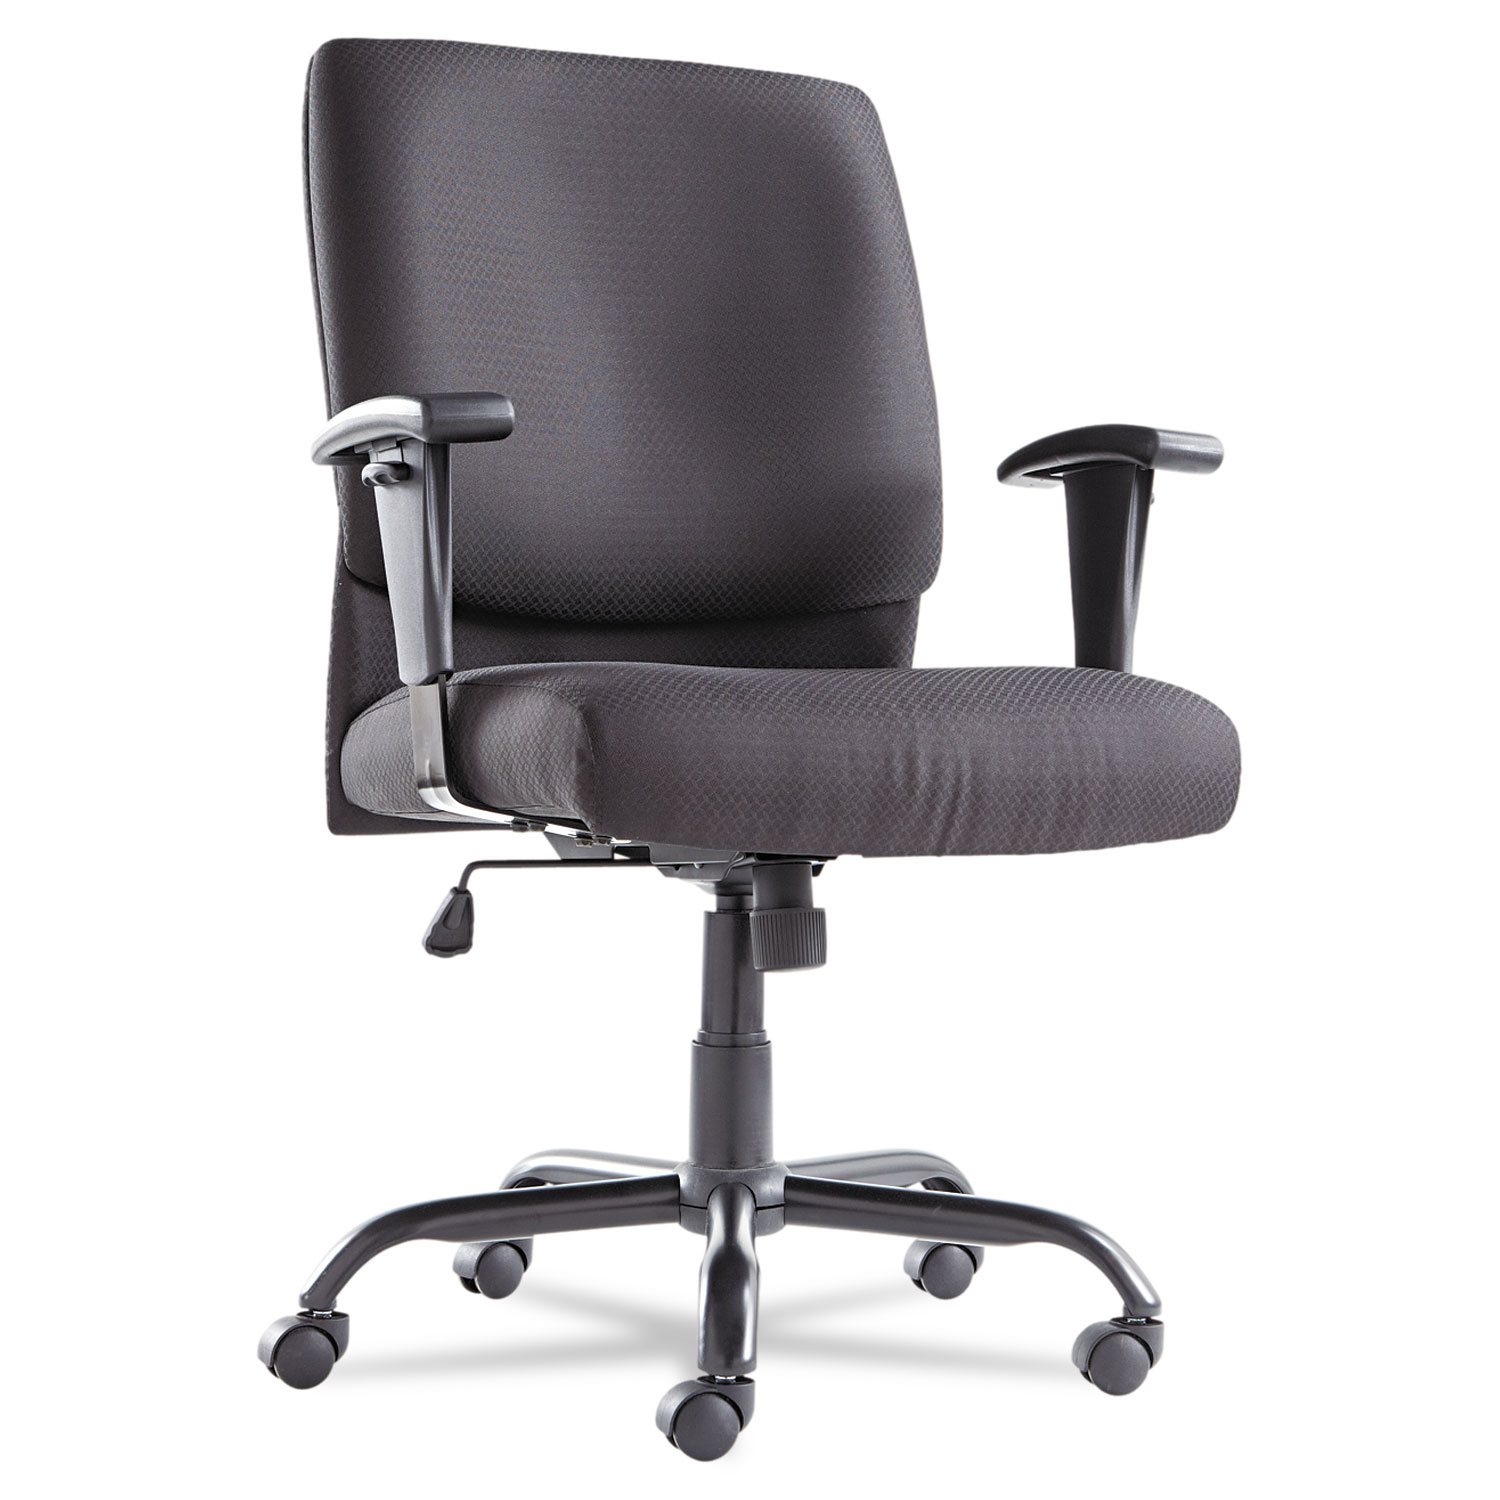  OIF OIFBT4510 Big and Tall Swivel/Tilt Mid-Back Chair, Supports up to 450 lbs., Black Seat/Black Back, Black Base (OIFBT4510) 